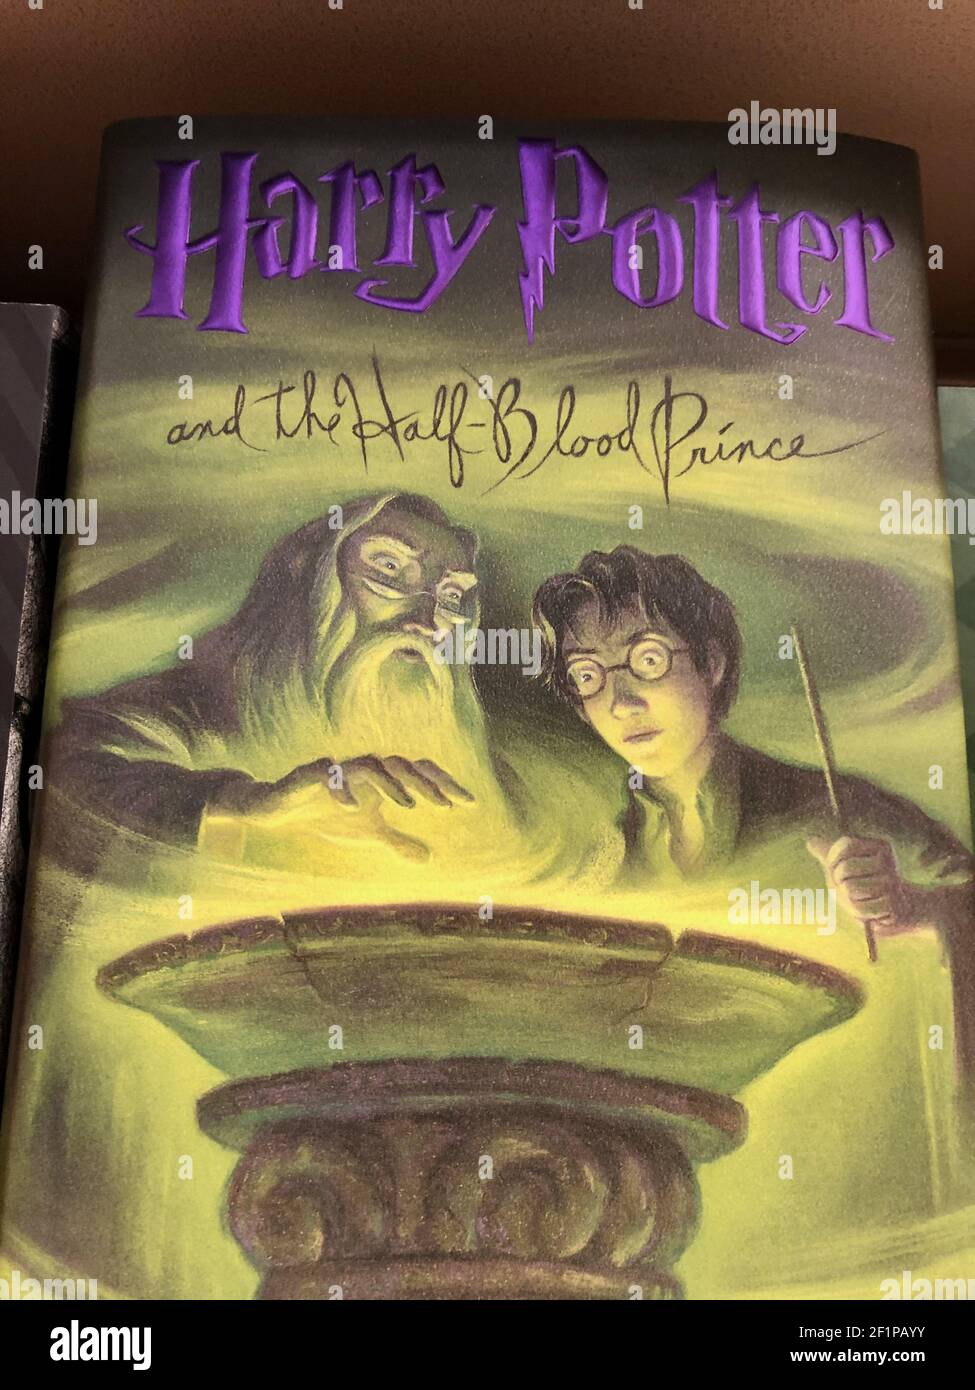 OCEAN SPRINGS, UNITED STATES - Mar 03, 2021: Low-angle view of “Harry Potter and The Goblet of Fire” novel by J.K. Rowling. Stock Photo